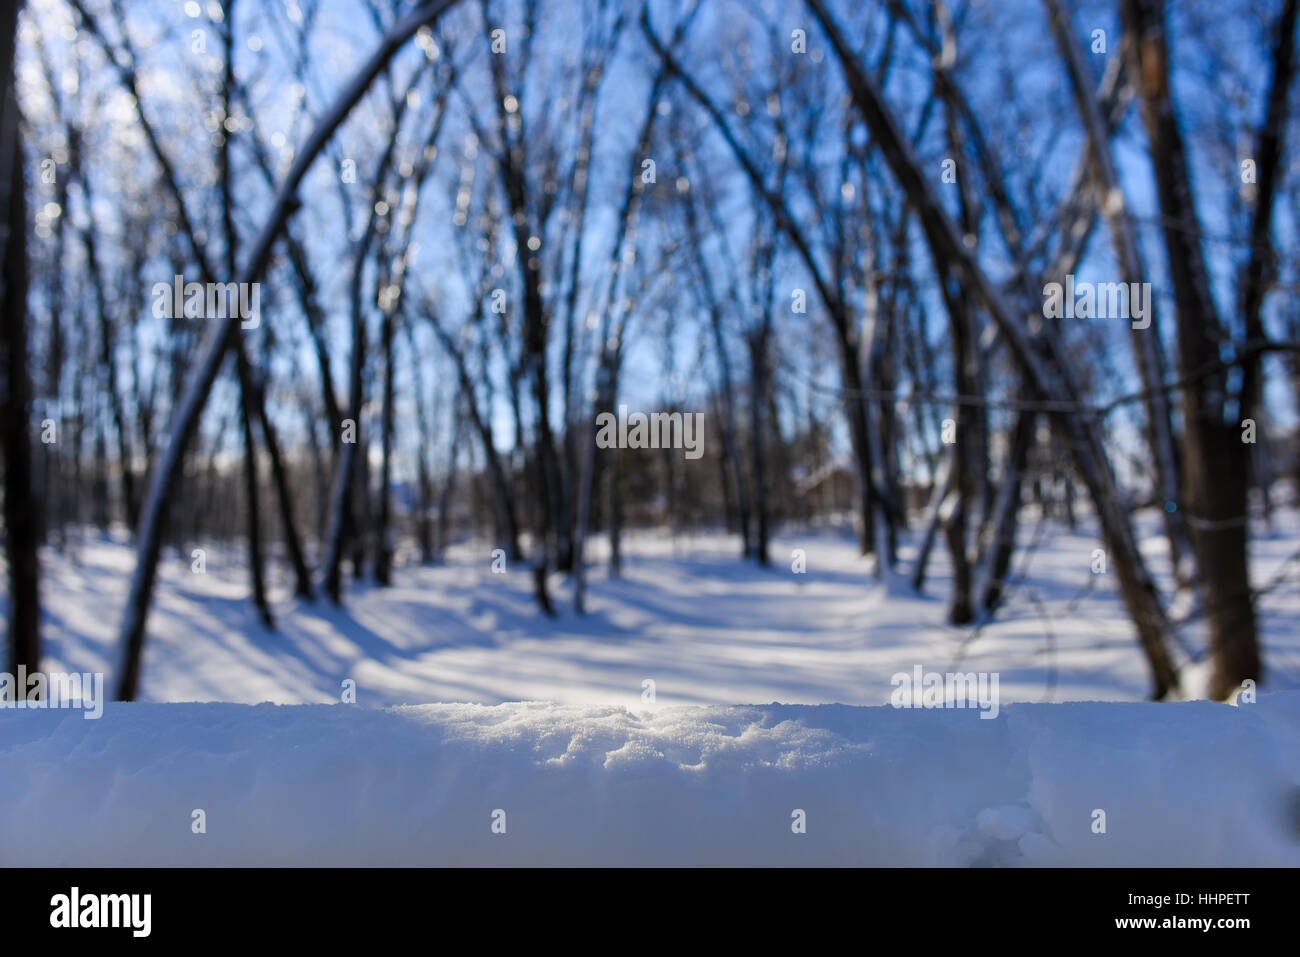 Snow in the forest in natural light Stock Photo